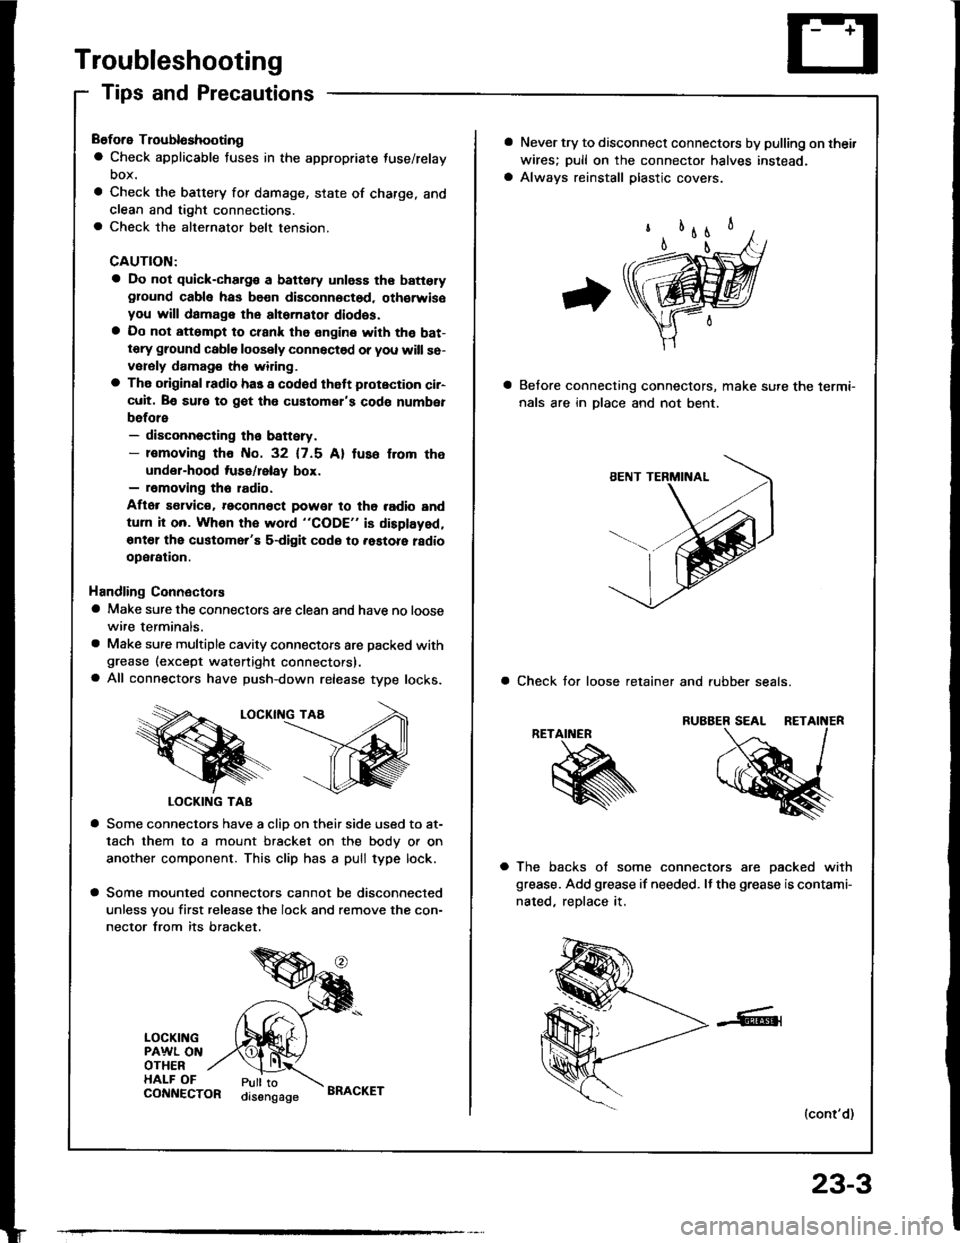 HONDA INTEGRA 1994 4.G Service Manual Troubleshooting
Tips and Precautions
Before Troubloshooting
a Check applicable fuses in the appropriate fuse/relay
DOX.
a Check the battery for damage, state of charge, and
clean and tight connections